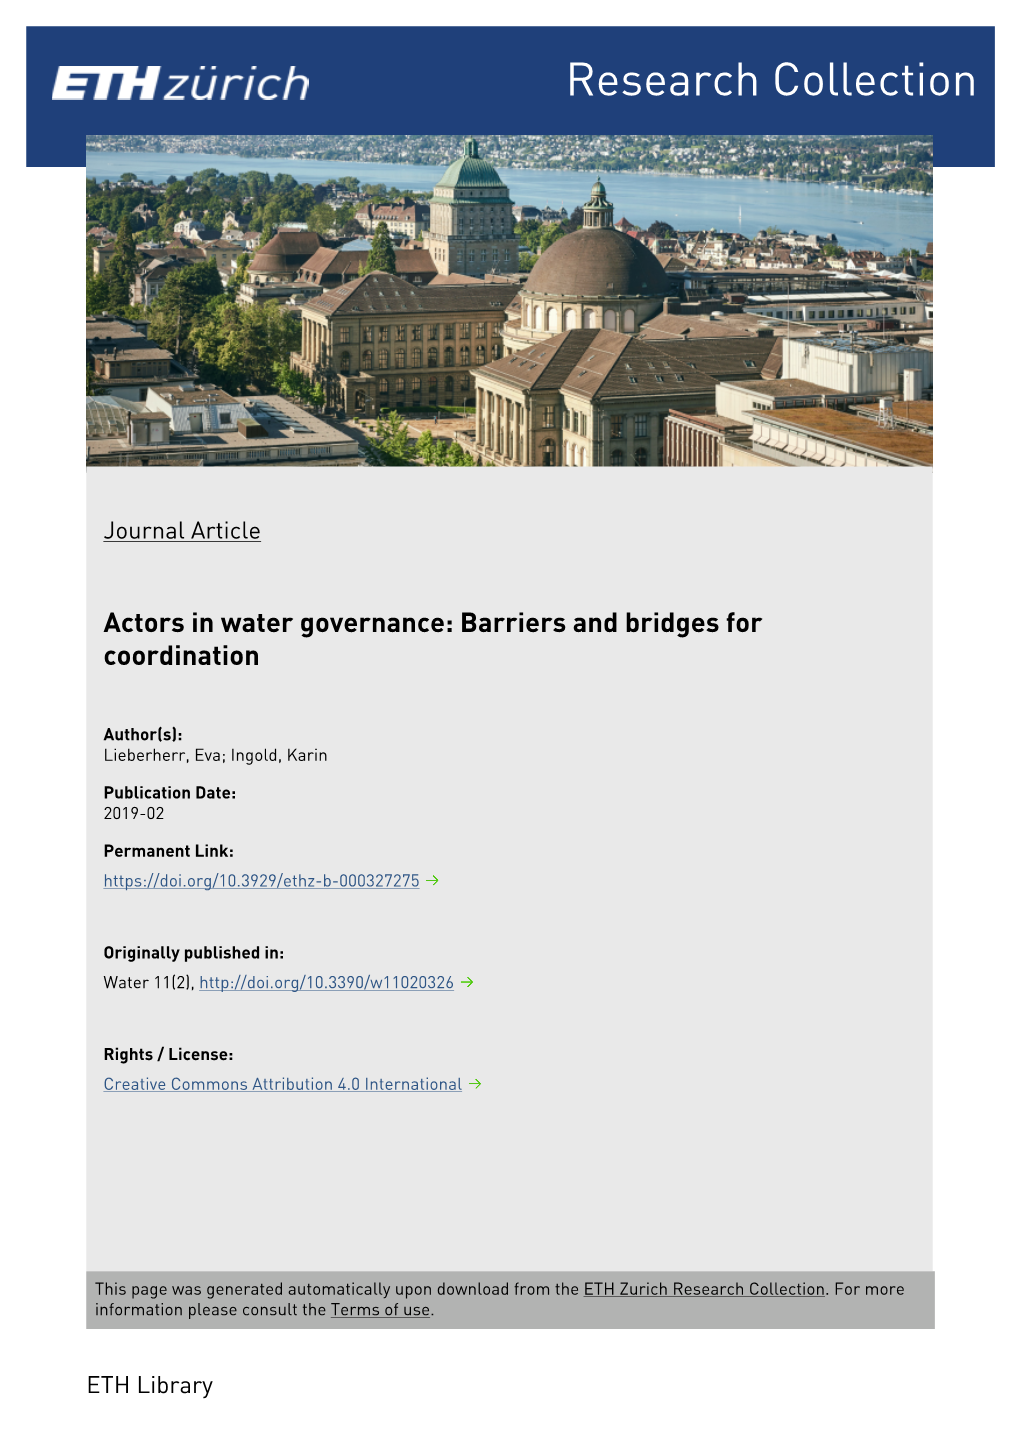 Actors in Water Governance: Barriers and Bridges for Coordination